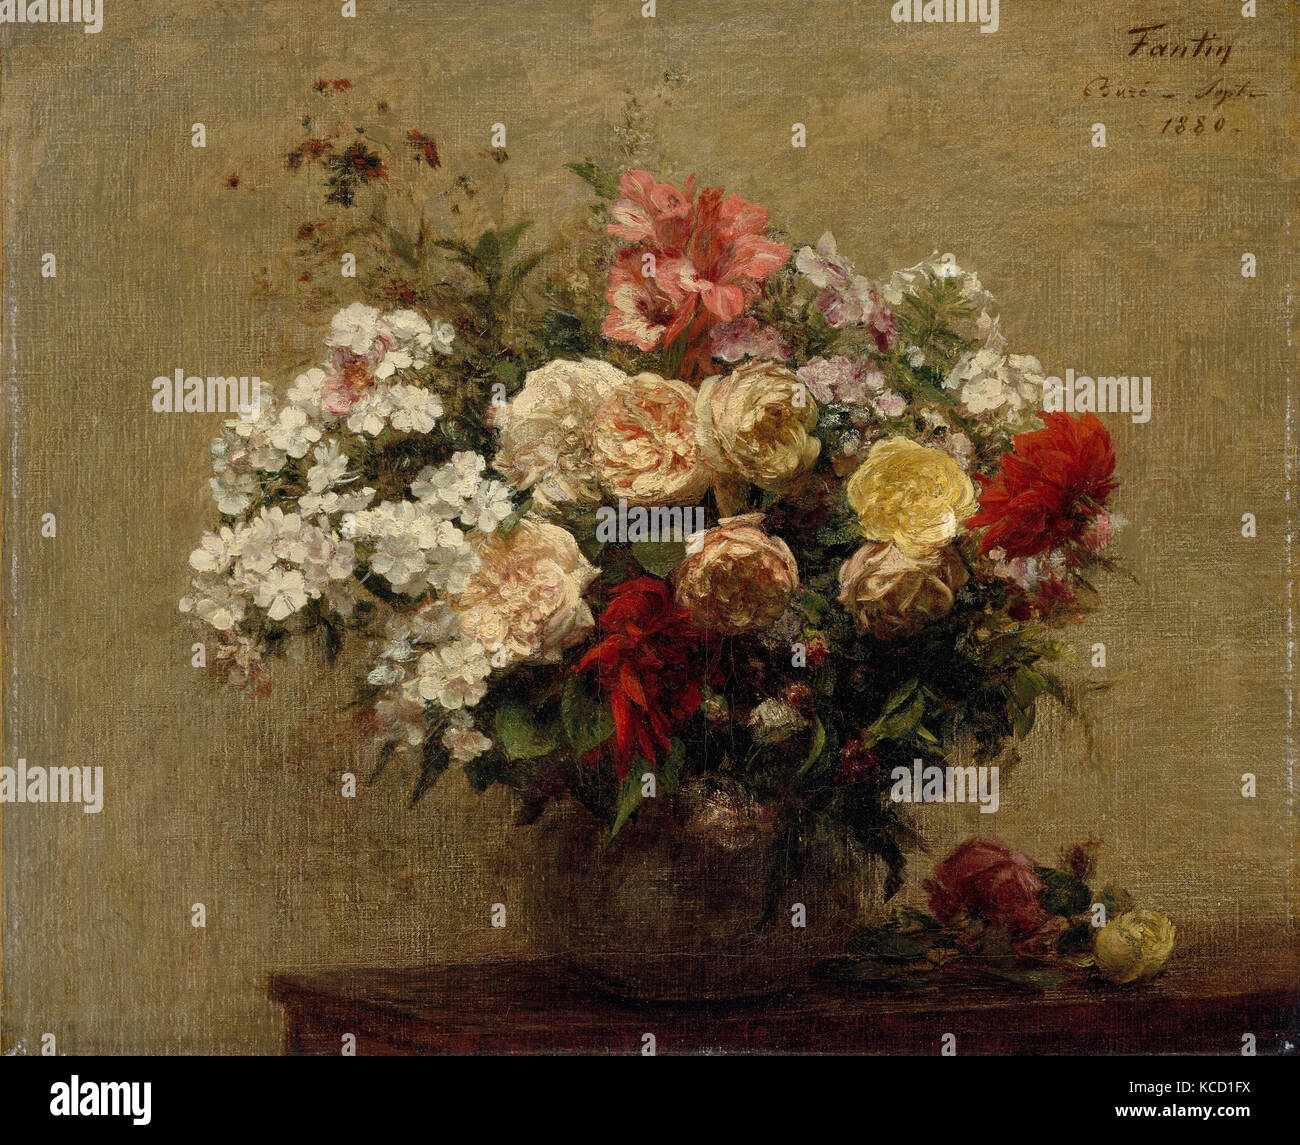 Summer Flowers, 1880, Oil on canvas, 20 x 24 3/8 in. (50.8 x 61.9 cm), Paintings, Henri Fantin-Latour (French, Grenoble 1836 Stock Photo